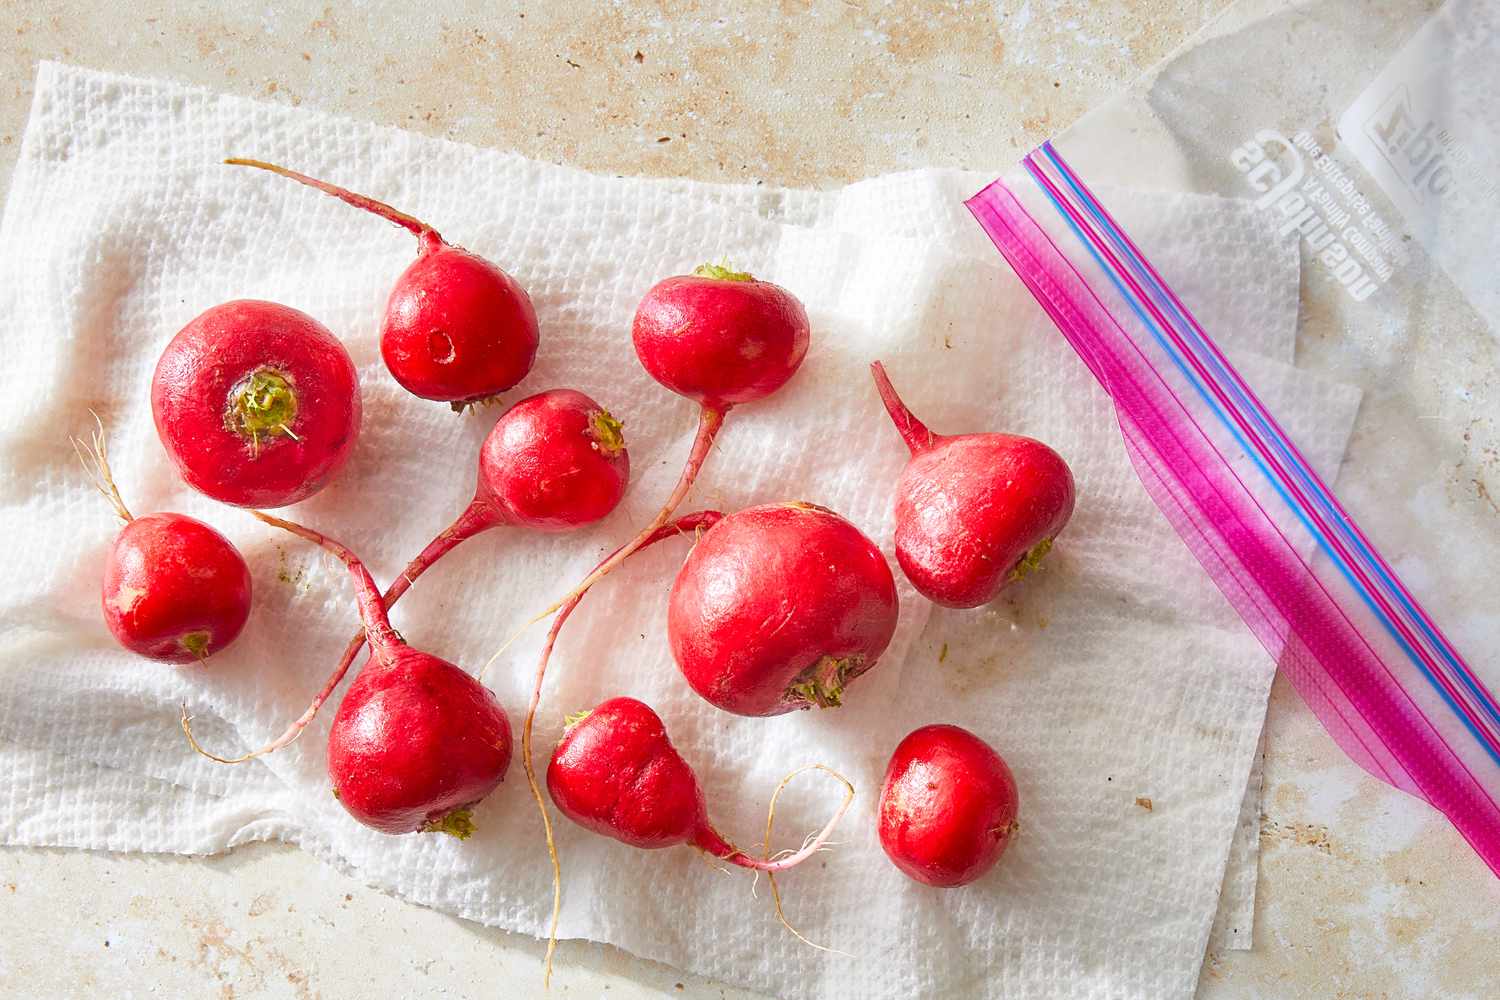 How To Store Radishes To Keep Them Fresh